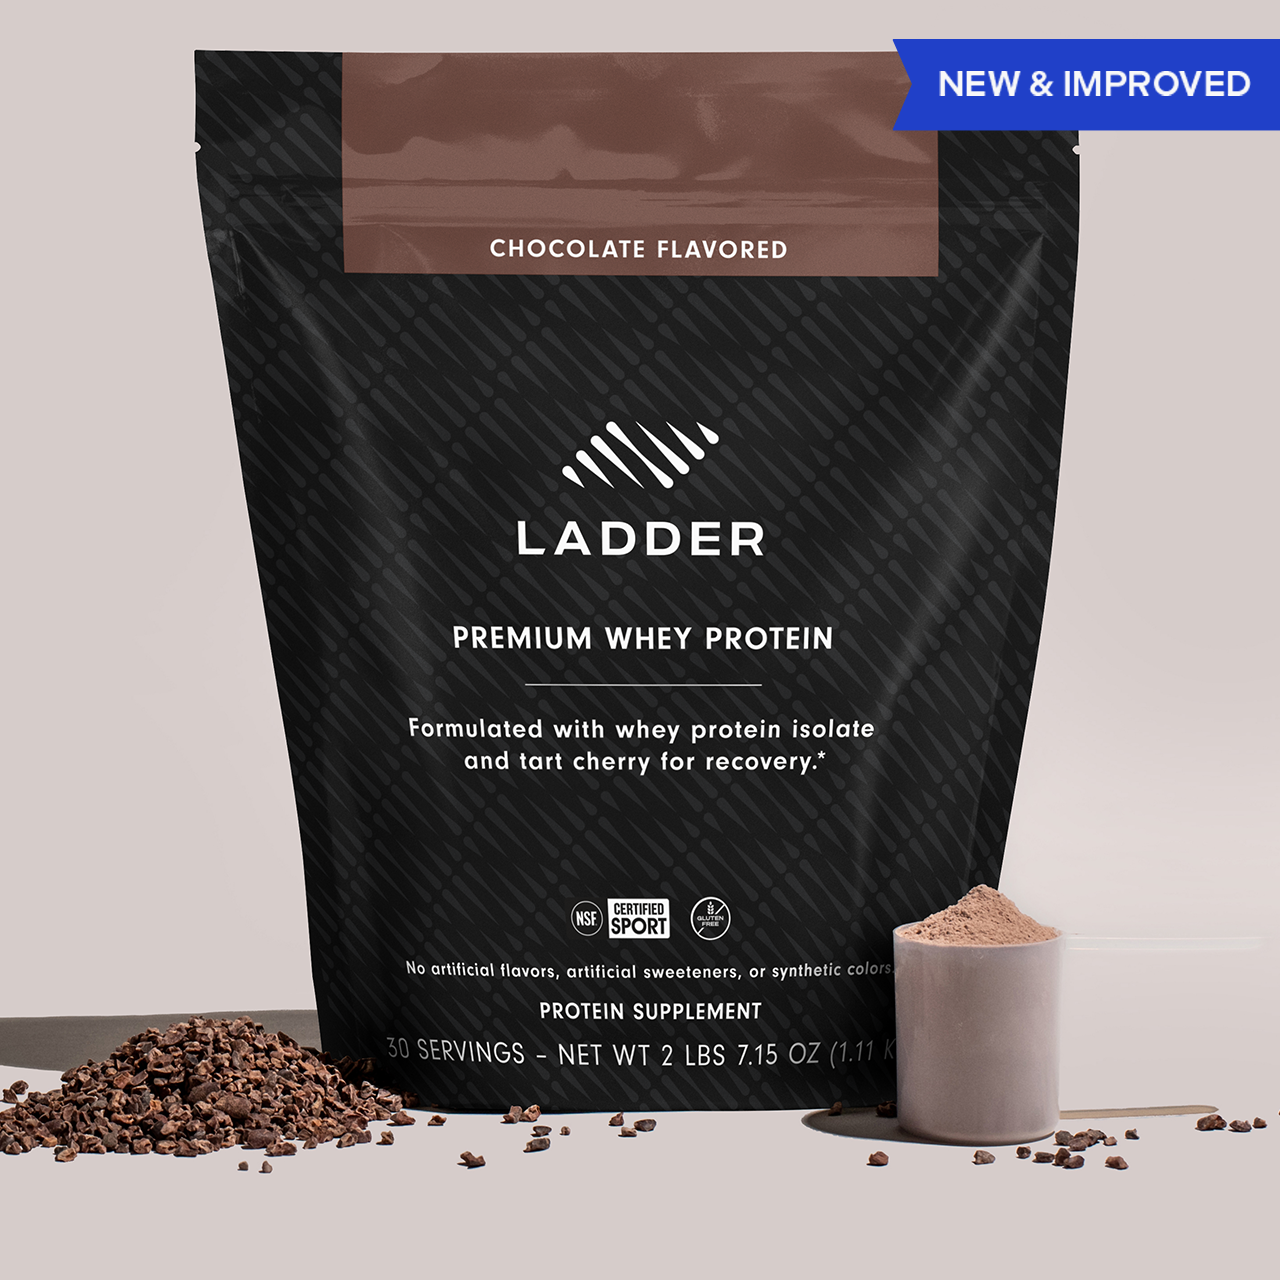 https://food.fnr.sndimg.com/content/dam/images/food/products/2022/1/22/rx_ladder-whey-protein.png.rend.hgtvcom.1280.1280.suffix/1642885930430.png